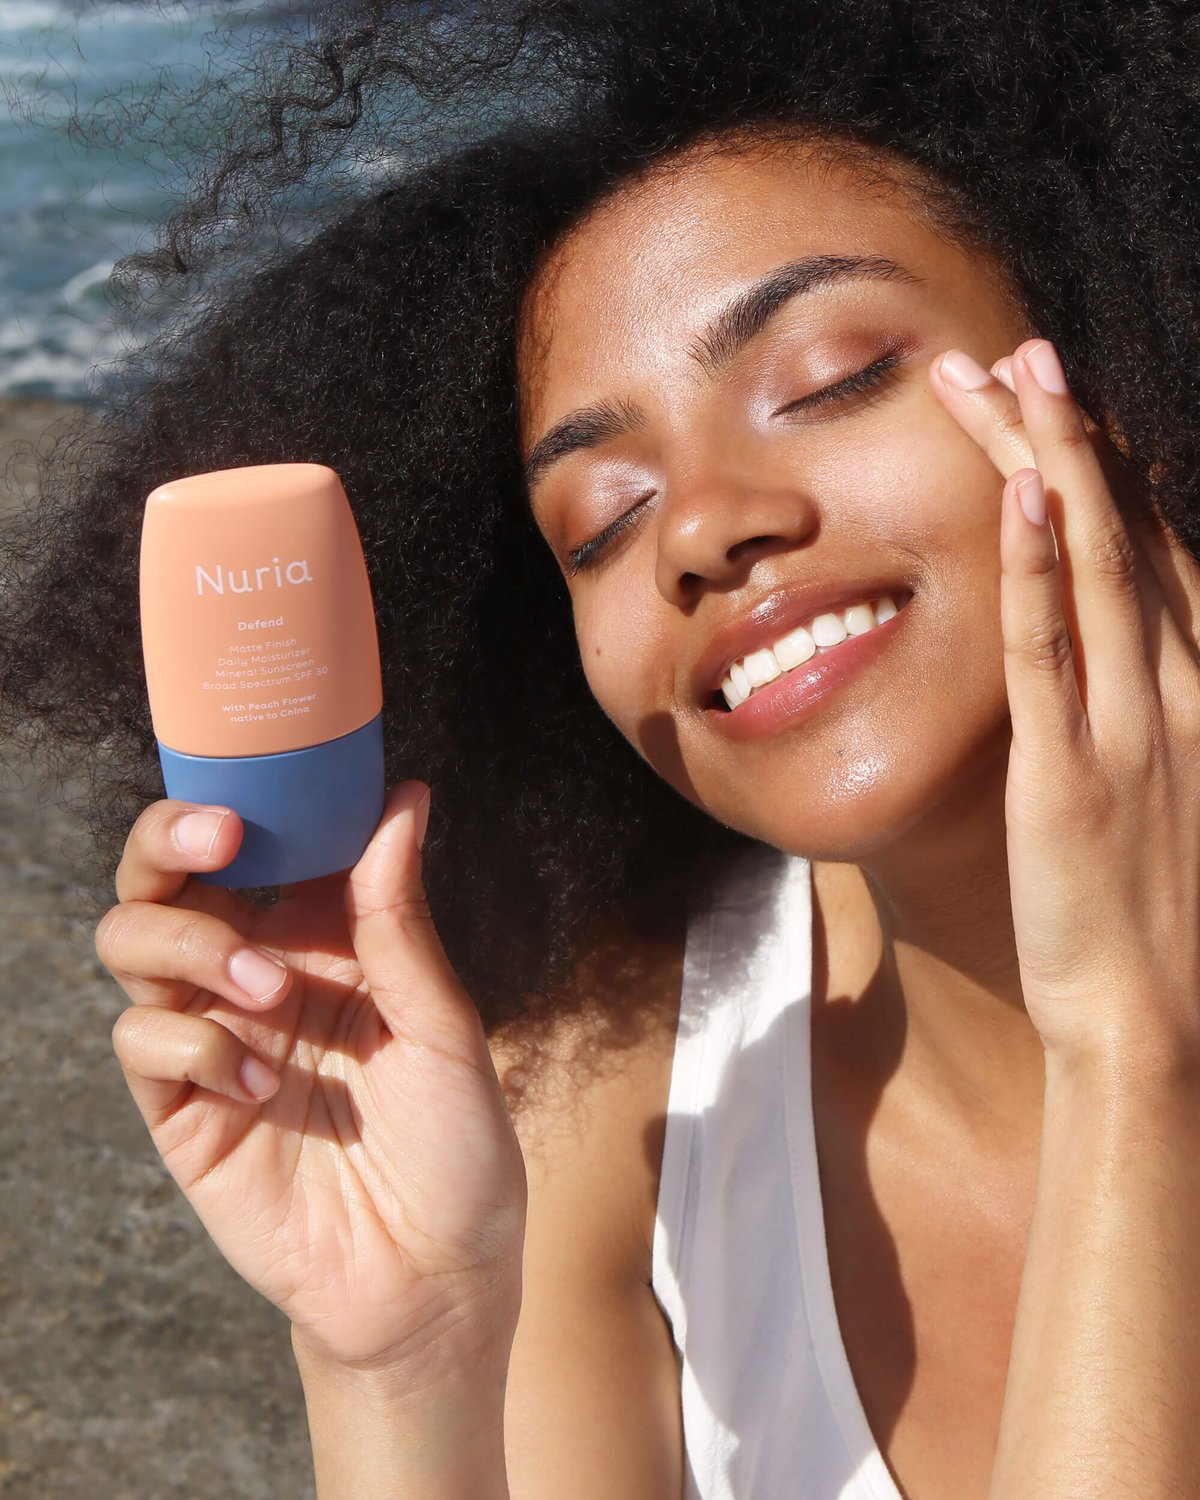 Nuria Defend Matte Finish Daily Moisturizer with All-Mineral SPF 30